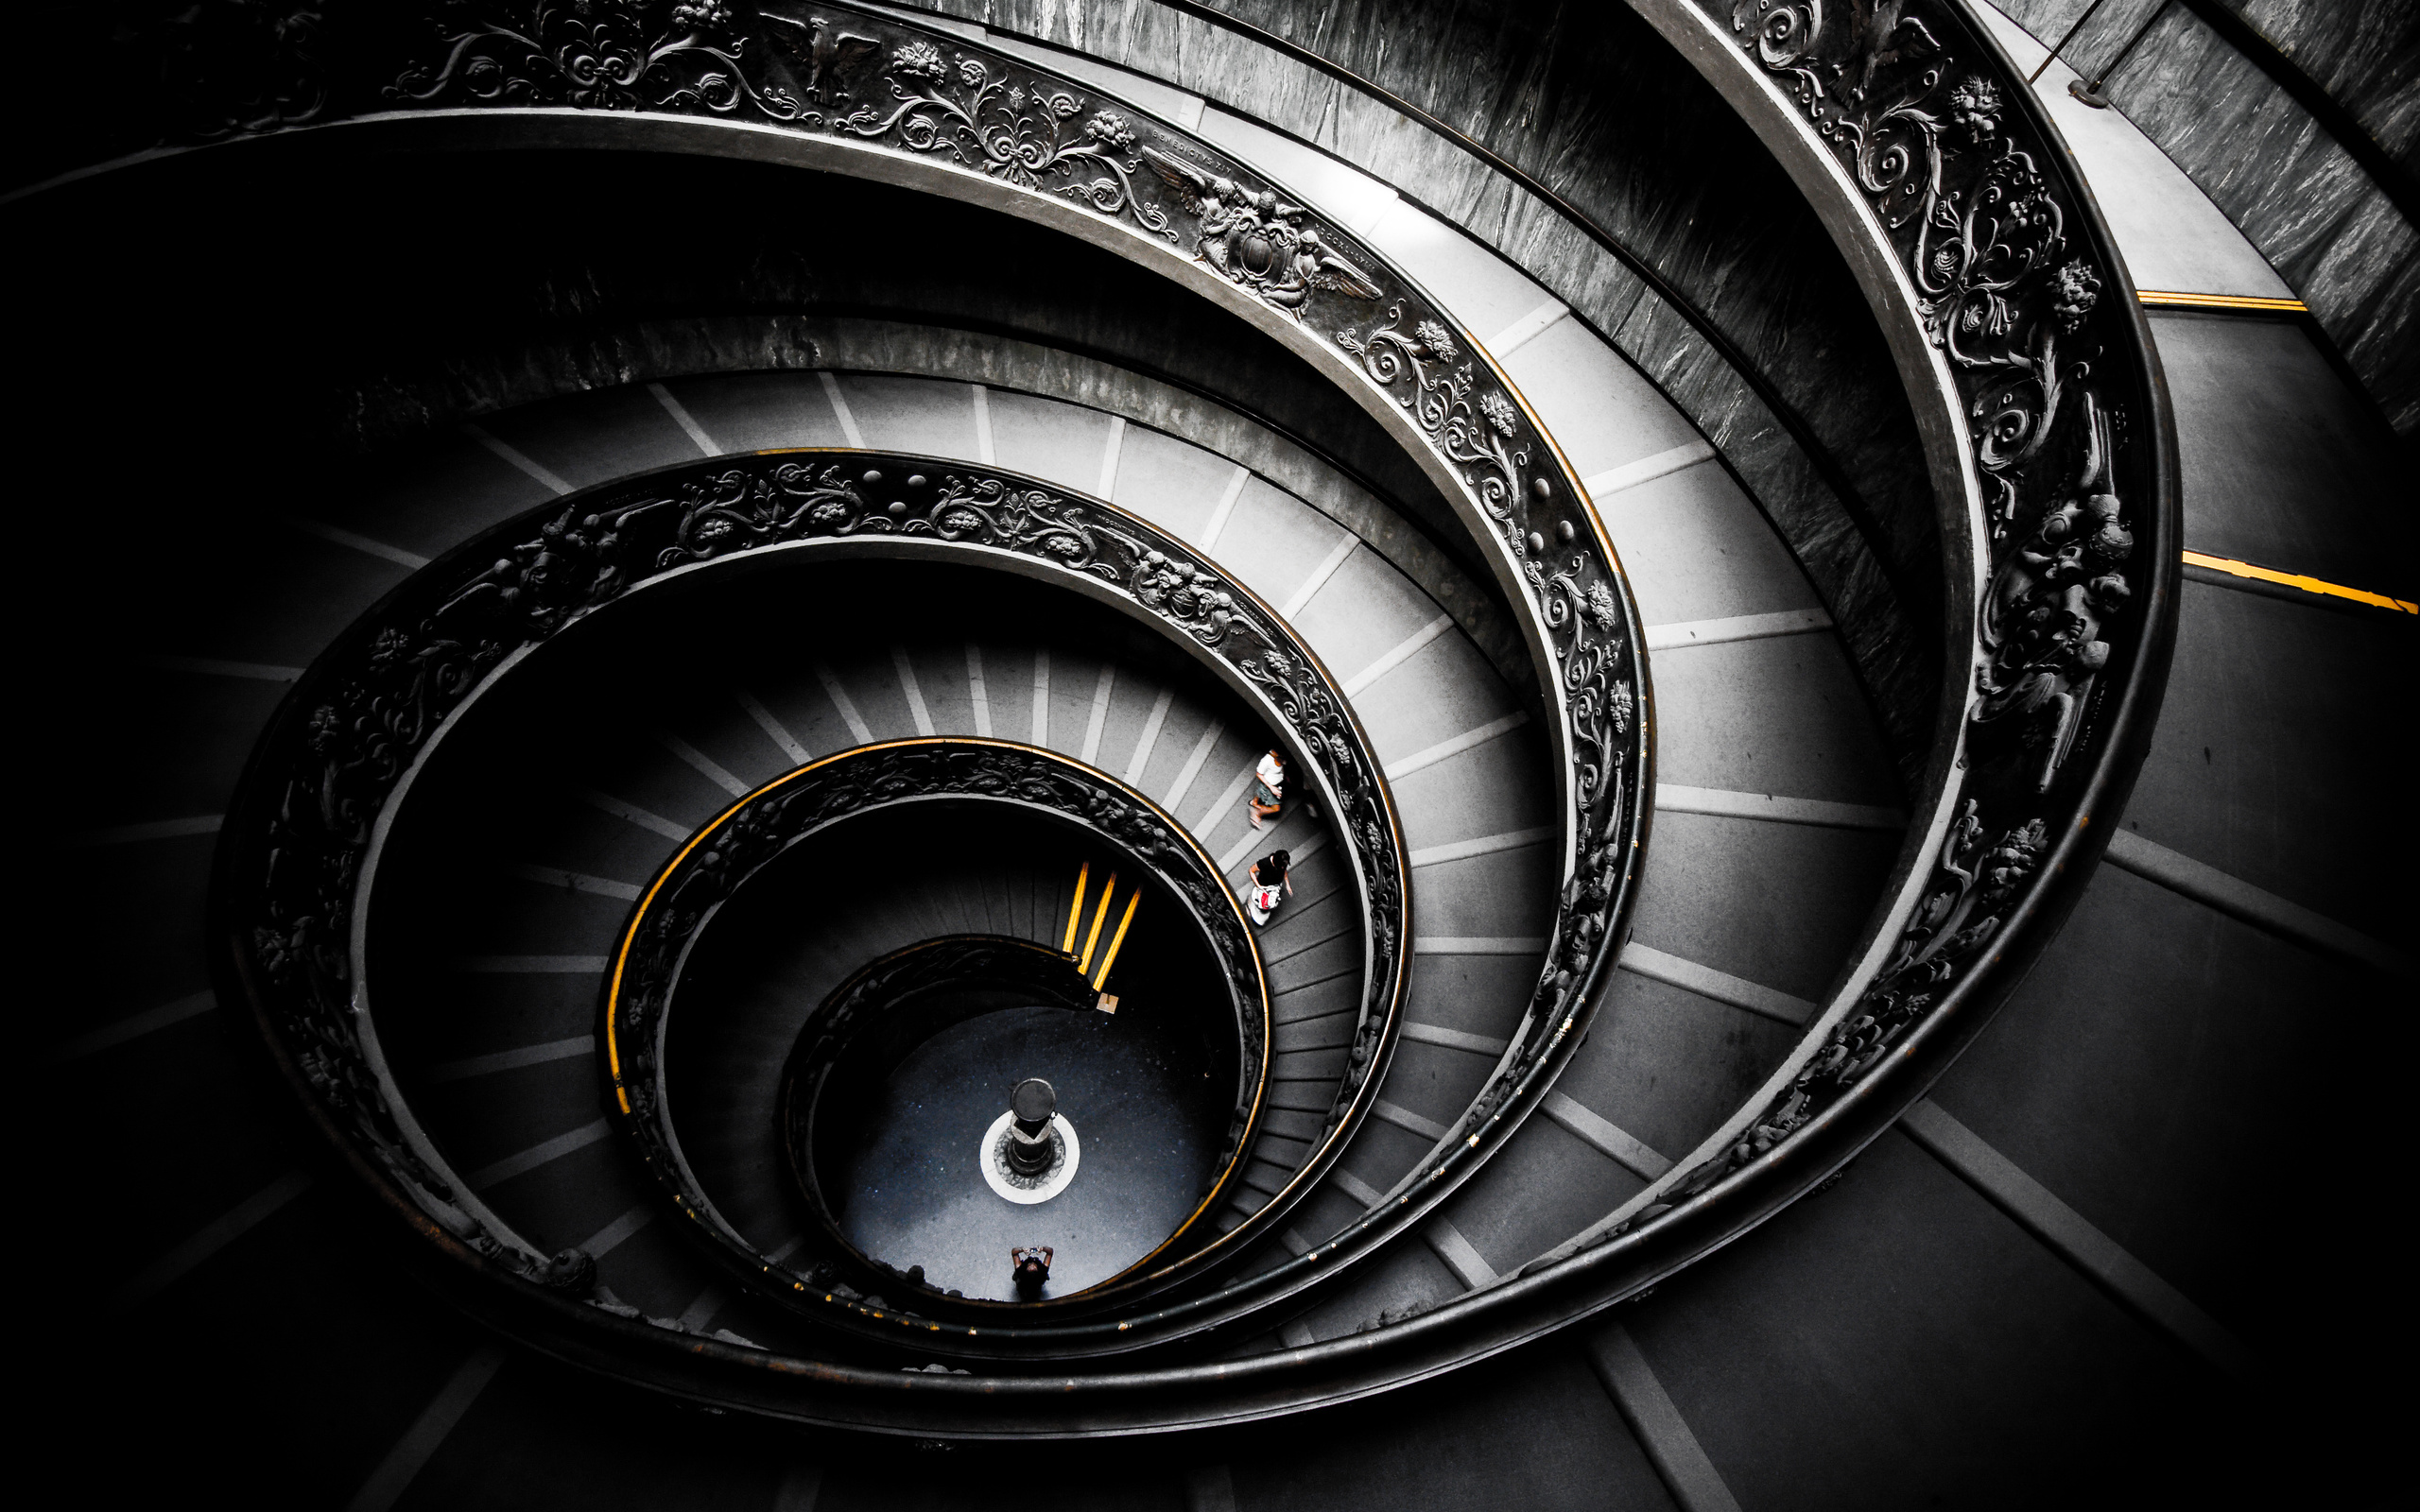 2560x1600 helix, great, staircase, art deco, great, stairway